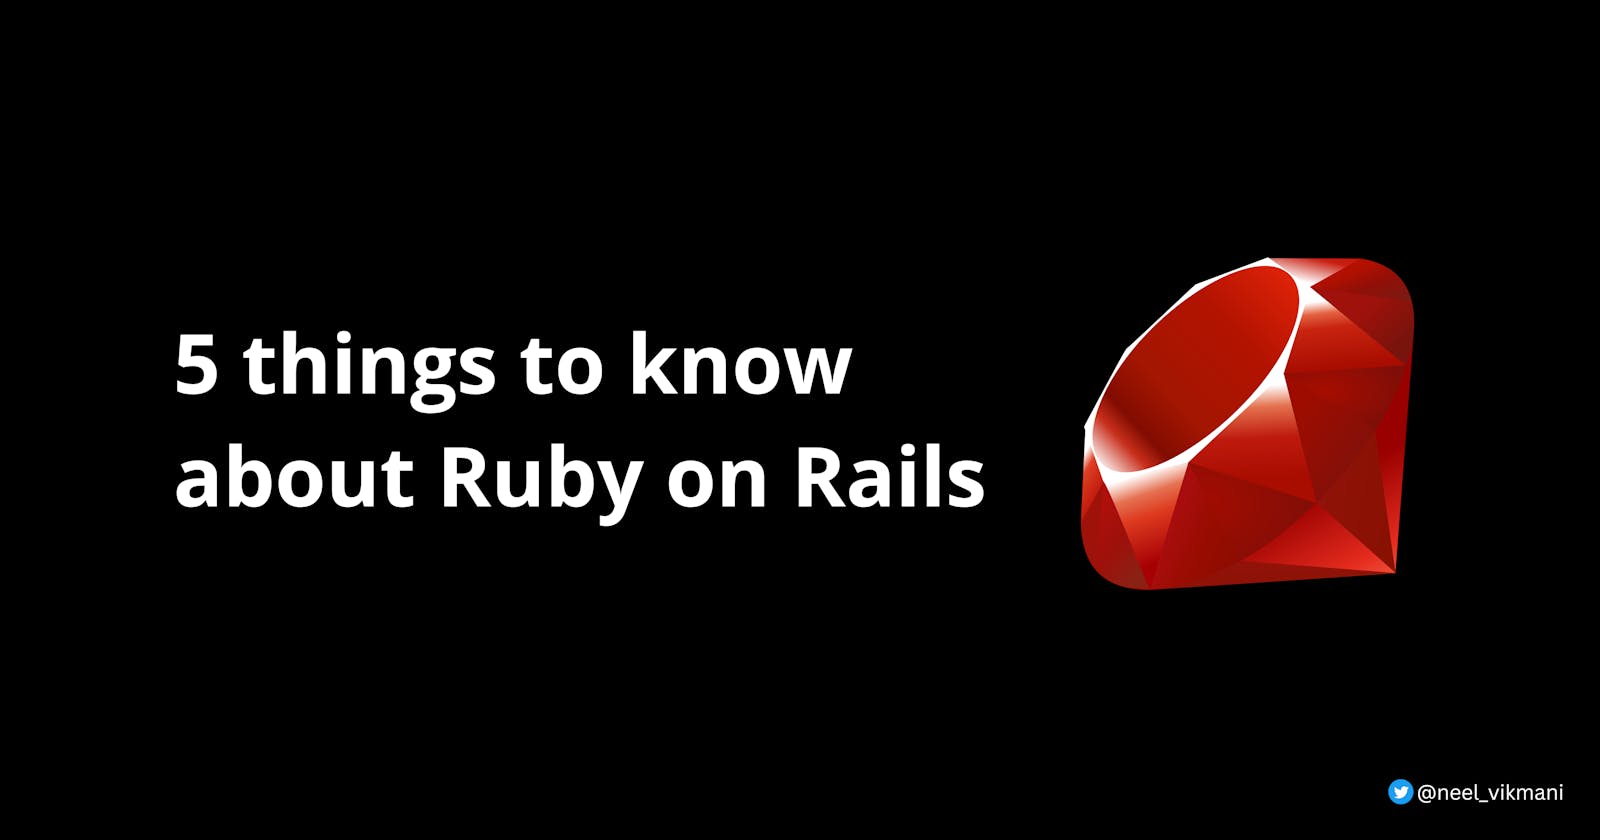 5 useful concepts of Ruby on Rails